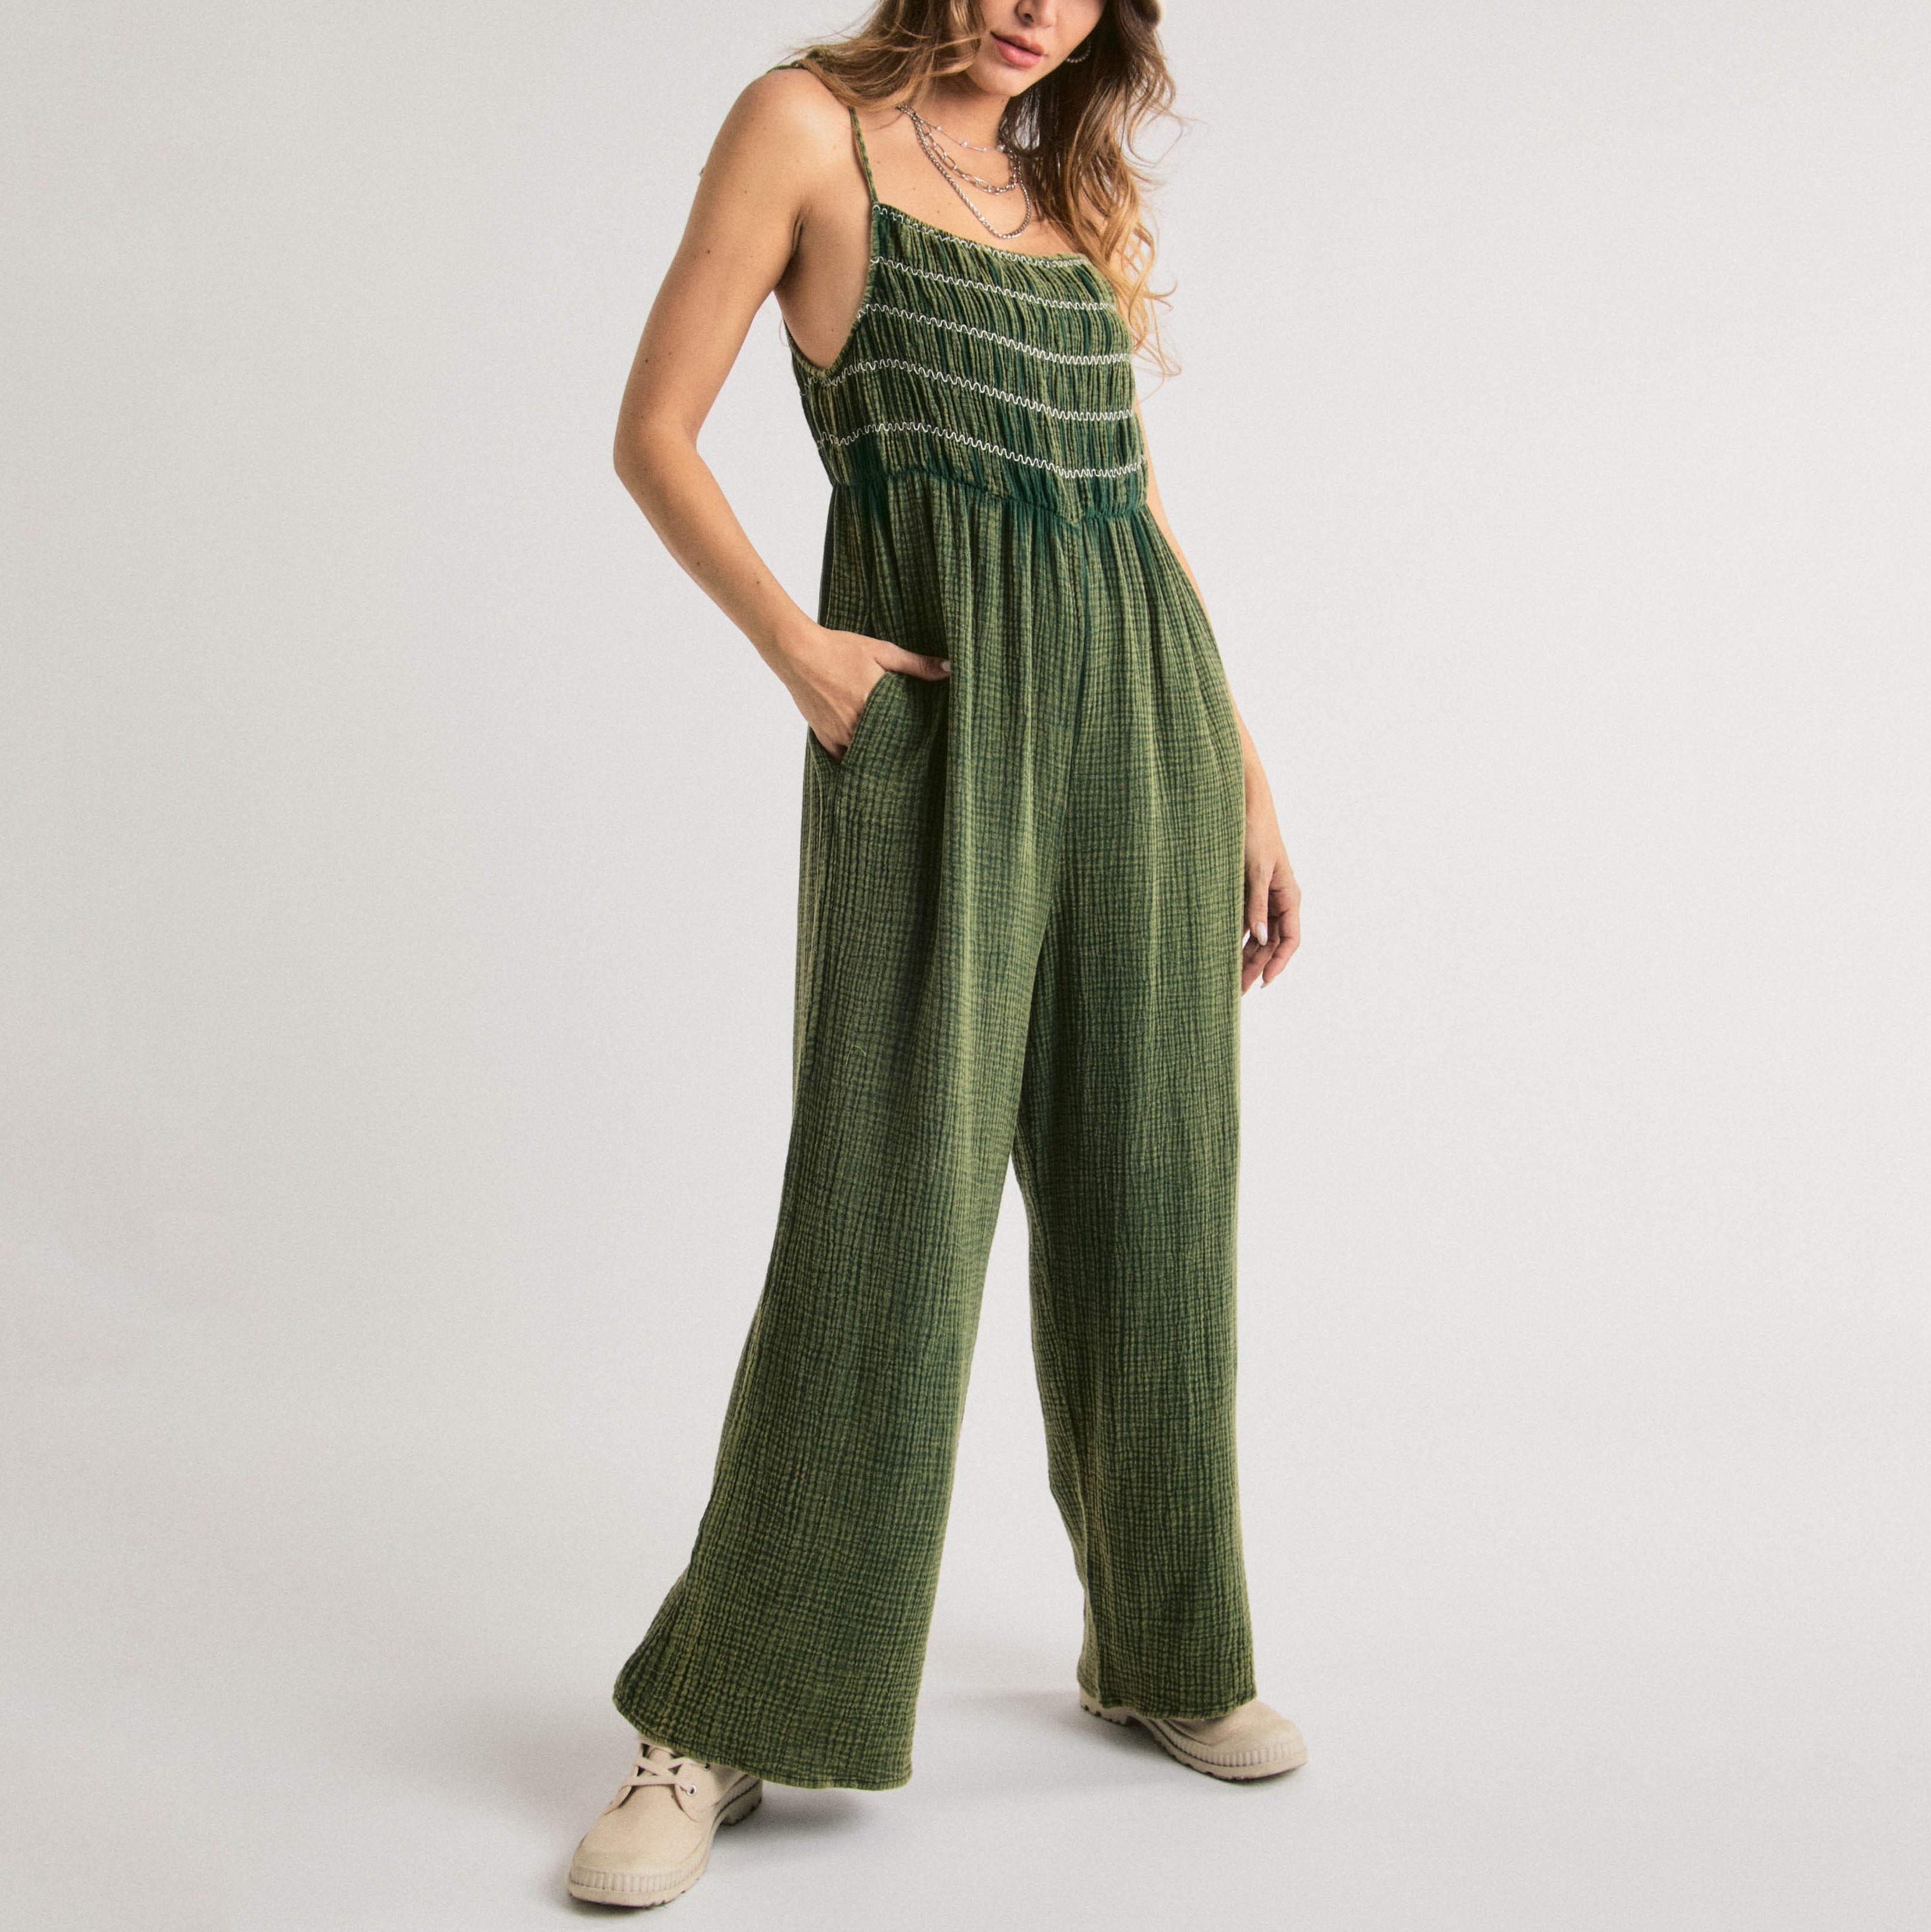  BTFBM Women Casual Summer Jumpsuits 2023 Sleeveless V Neck  Spaghetti Strap Long Pants Rompers One Piece Jumpsuit Outfits(Solid Army  Green, Small) : Clothing, Shoes & Jewelry